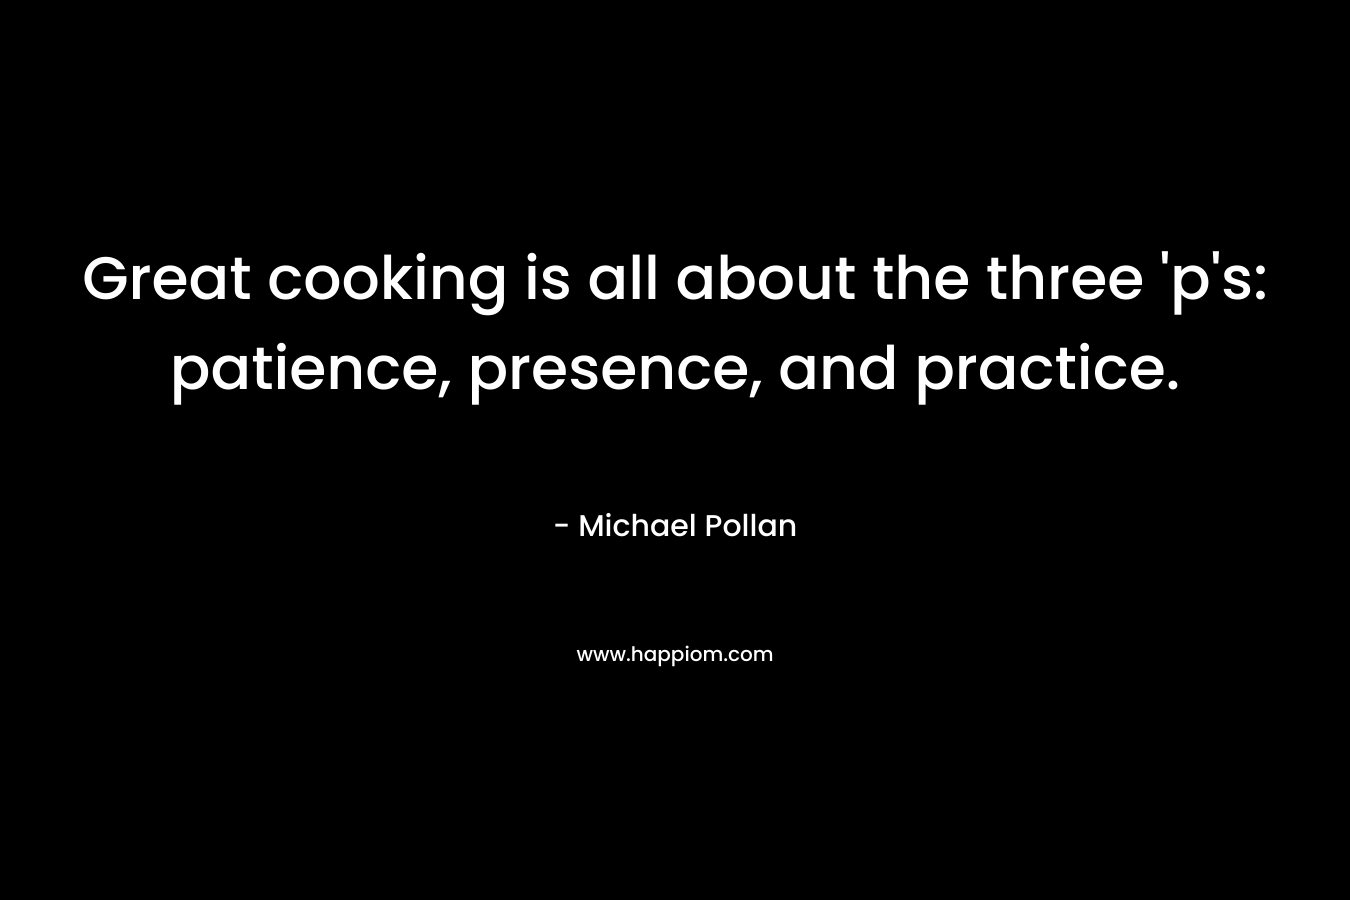 Great cooking is all about the three ‘p’s: patience, presence, and practice. – Michael Pollan